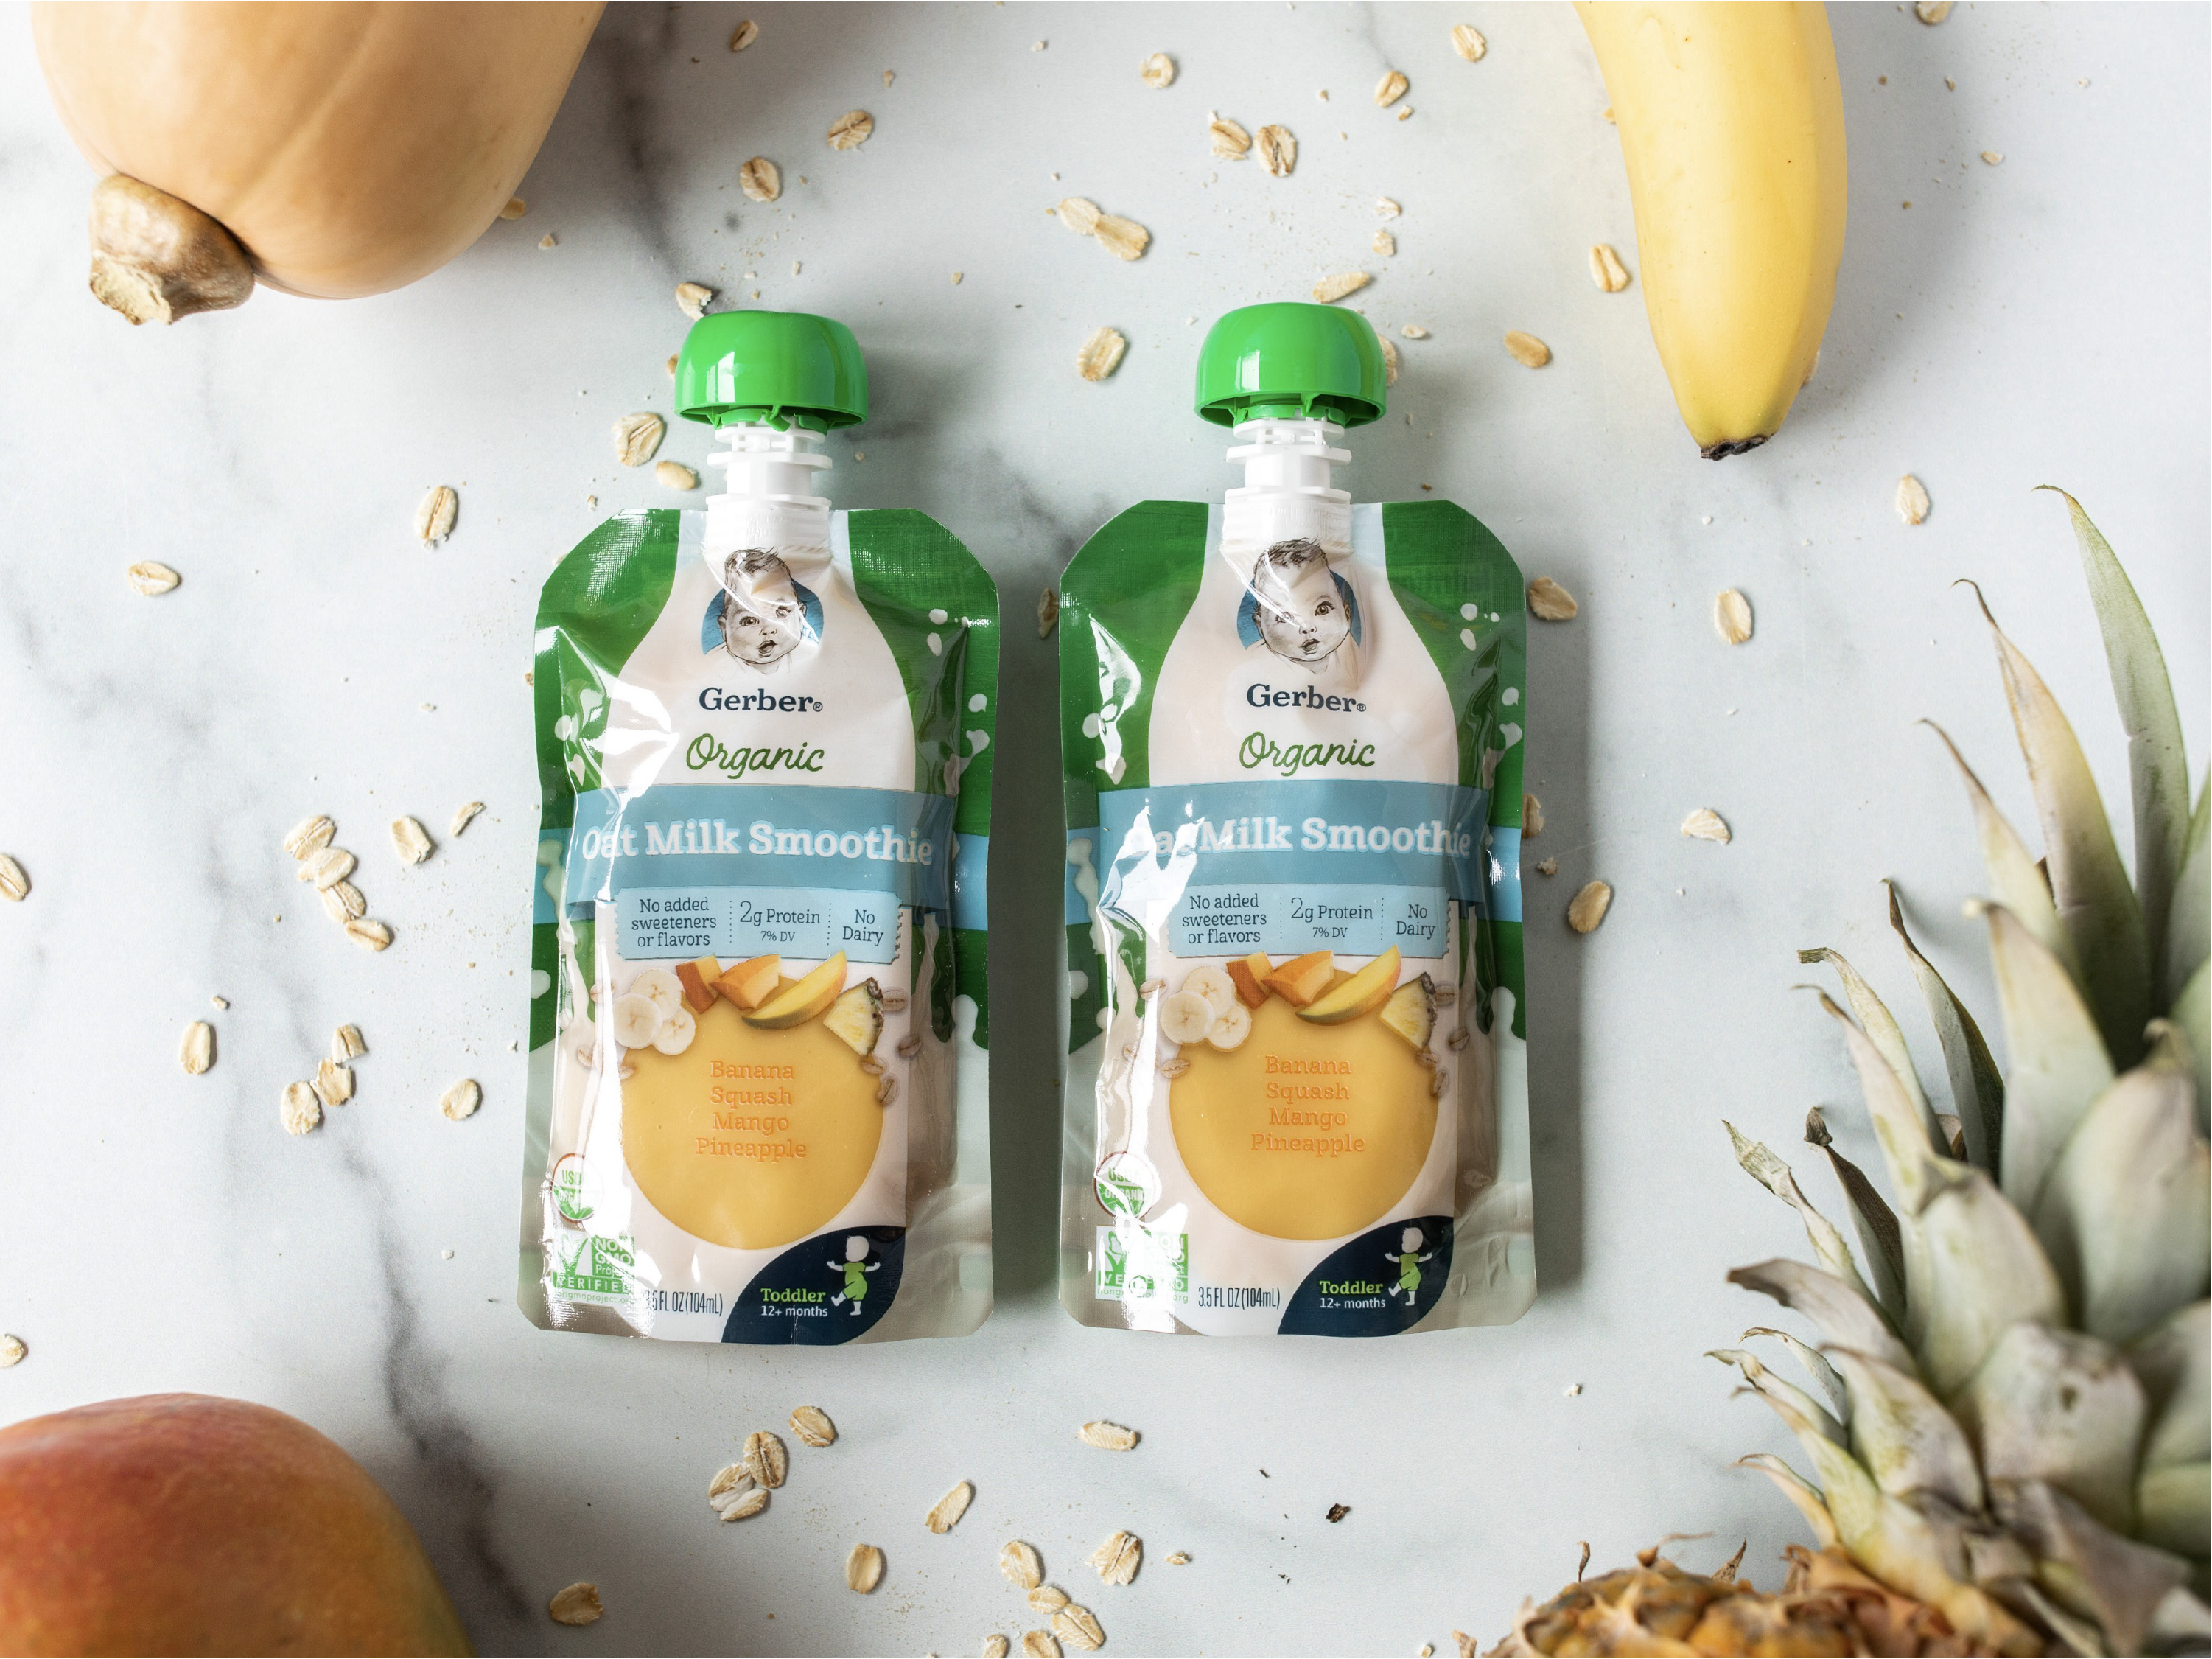 Gerber oat milk smoothie pouches